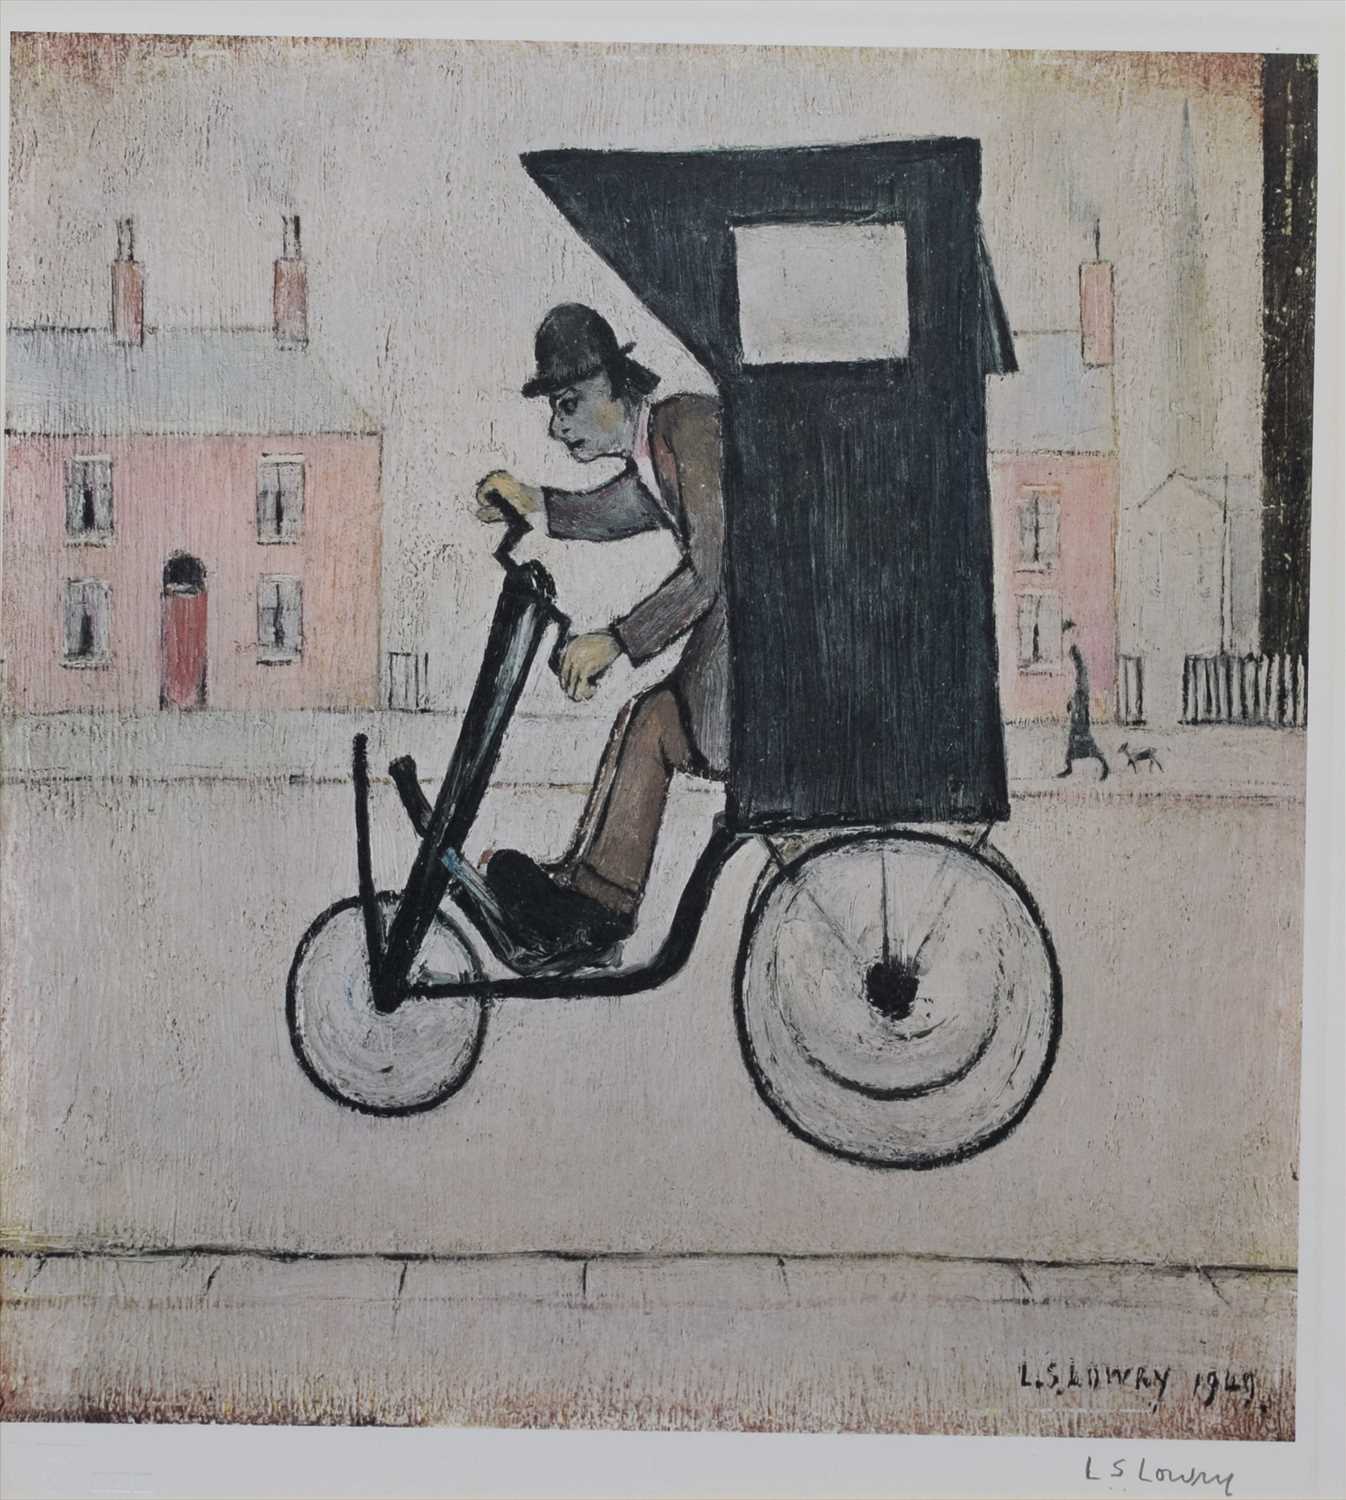 Lot 129 - After L.S. Lowry, "The Contraption", signed print and accompanying print sketches (2).